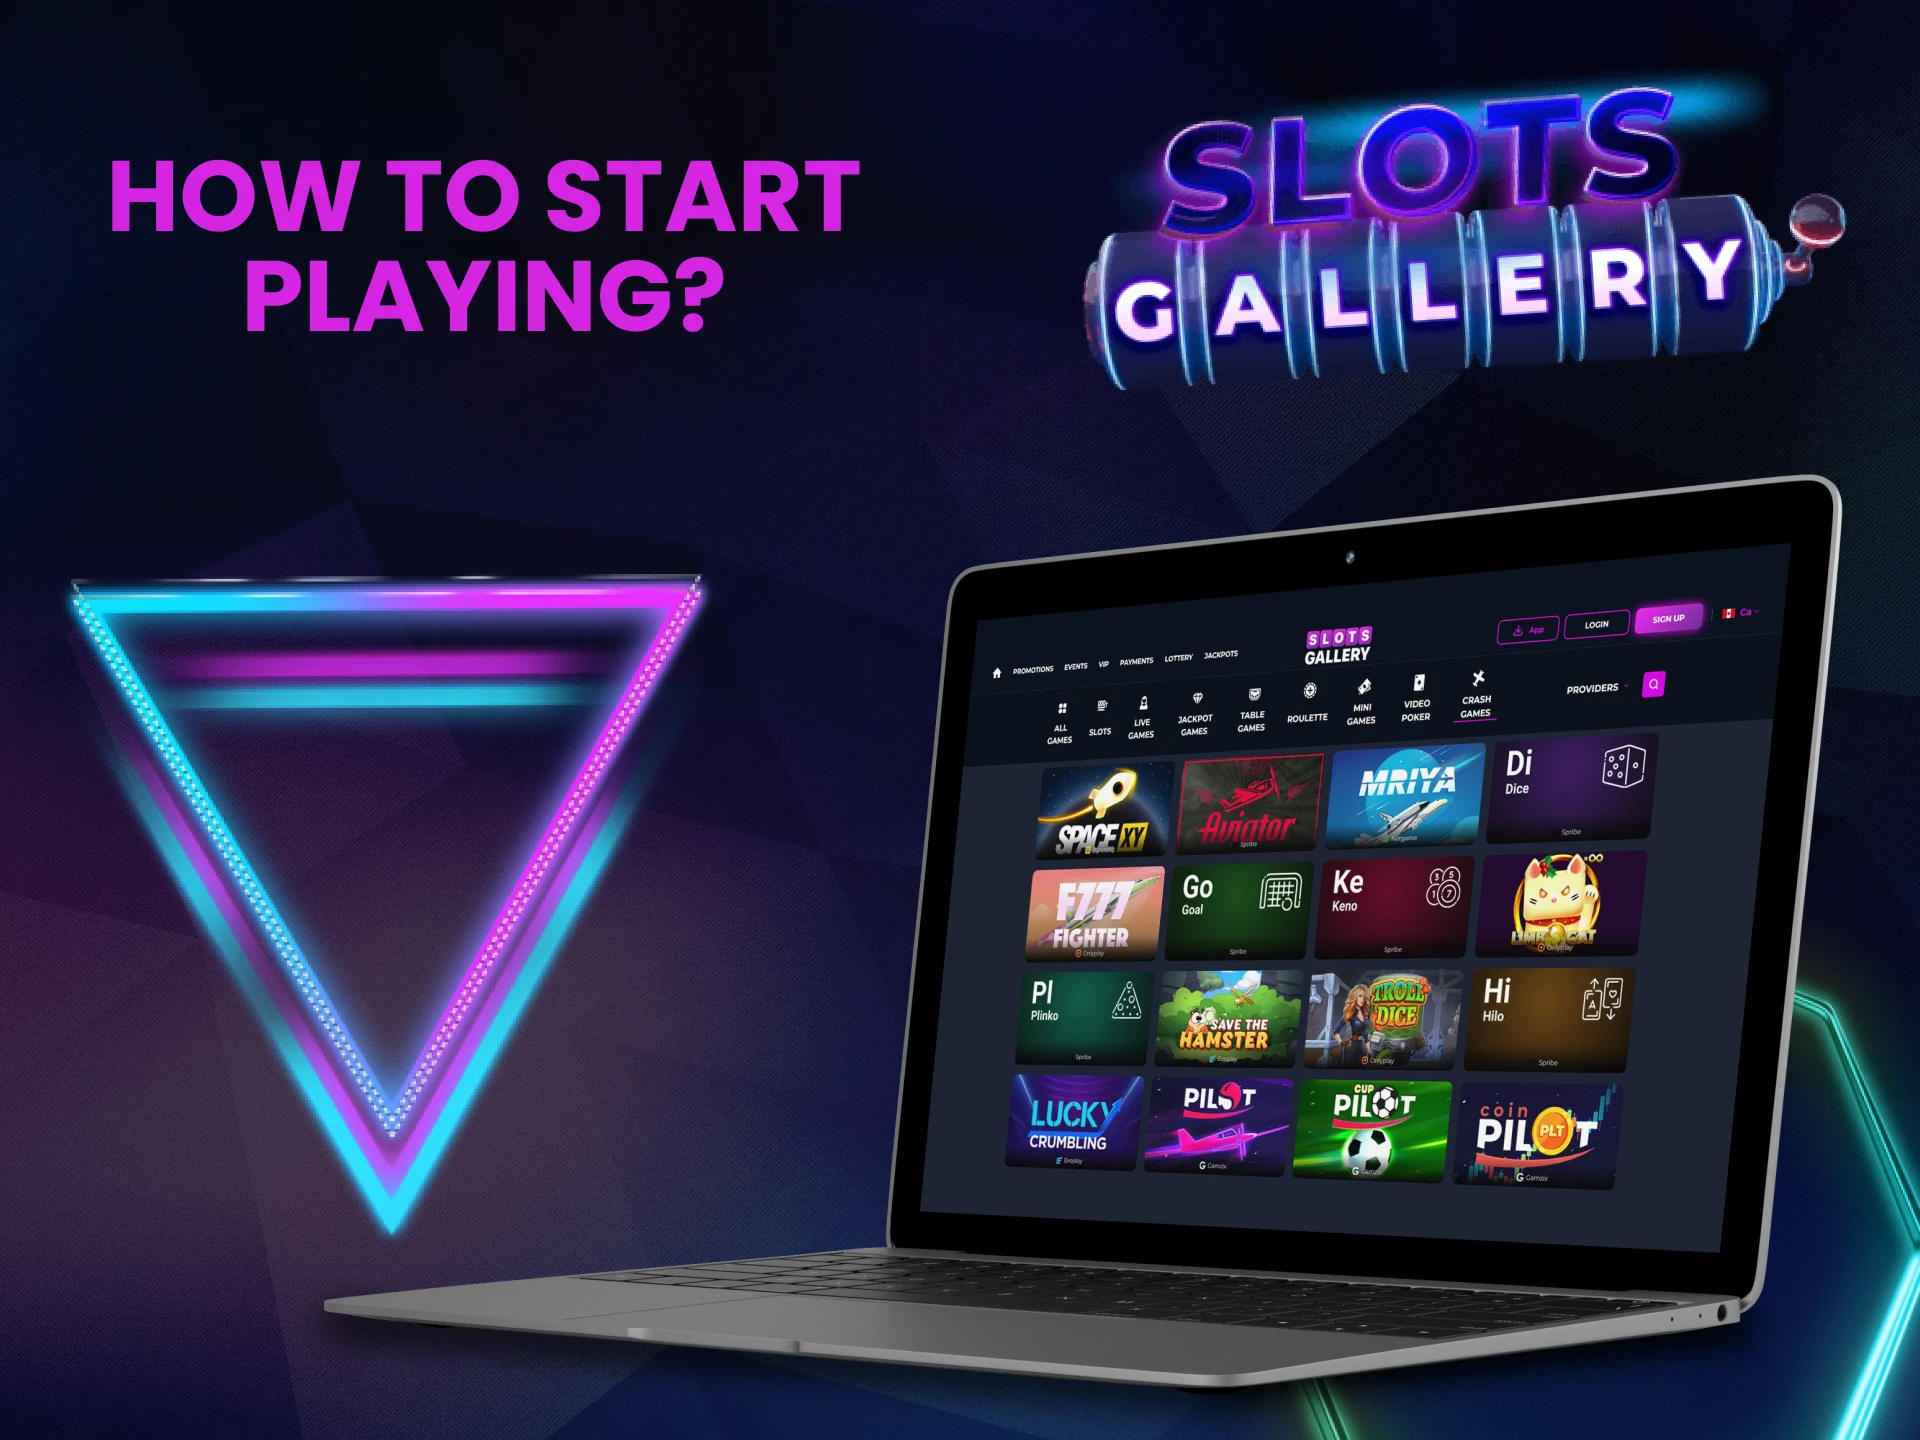 We will show you how to start playing crash games on Slots Gallery.